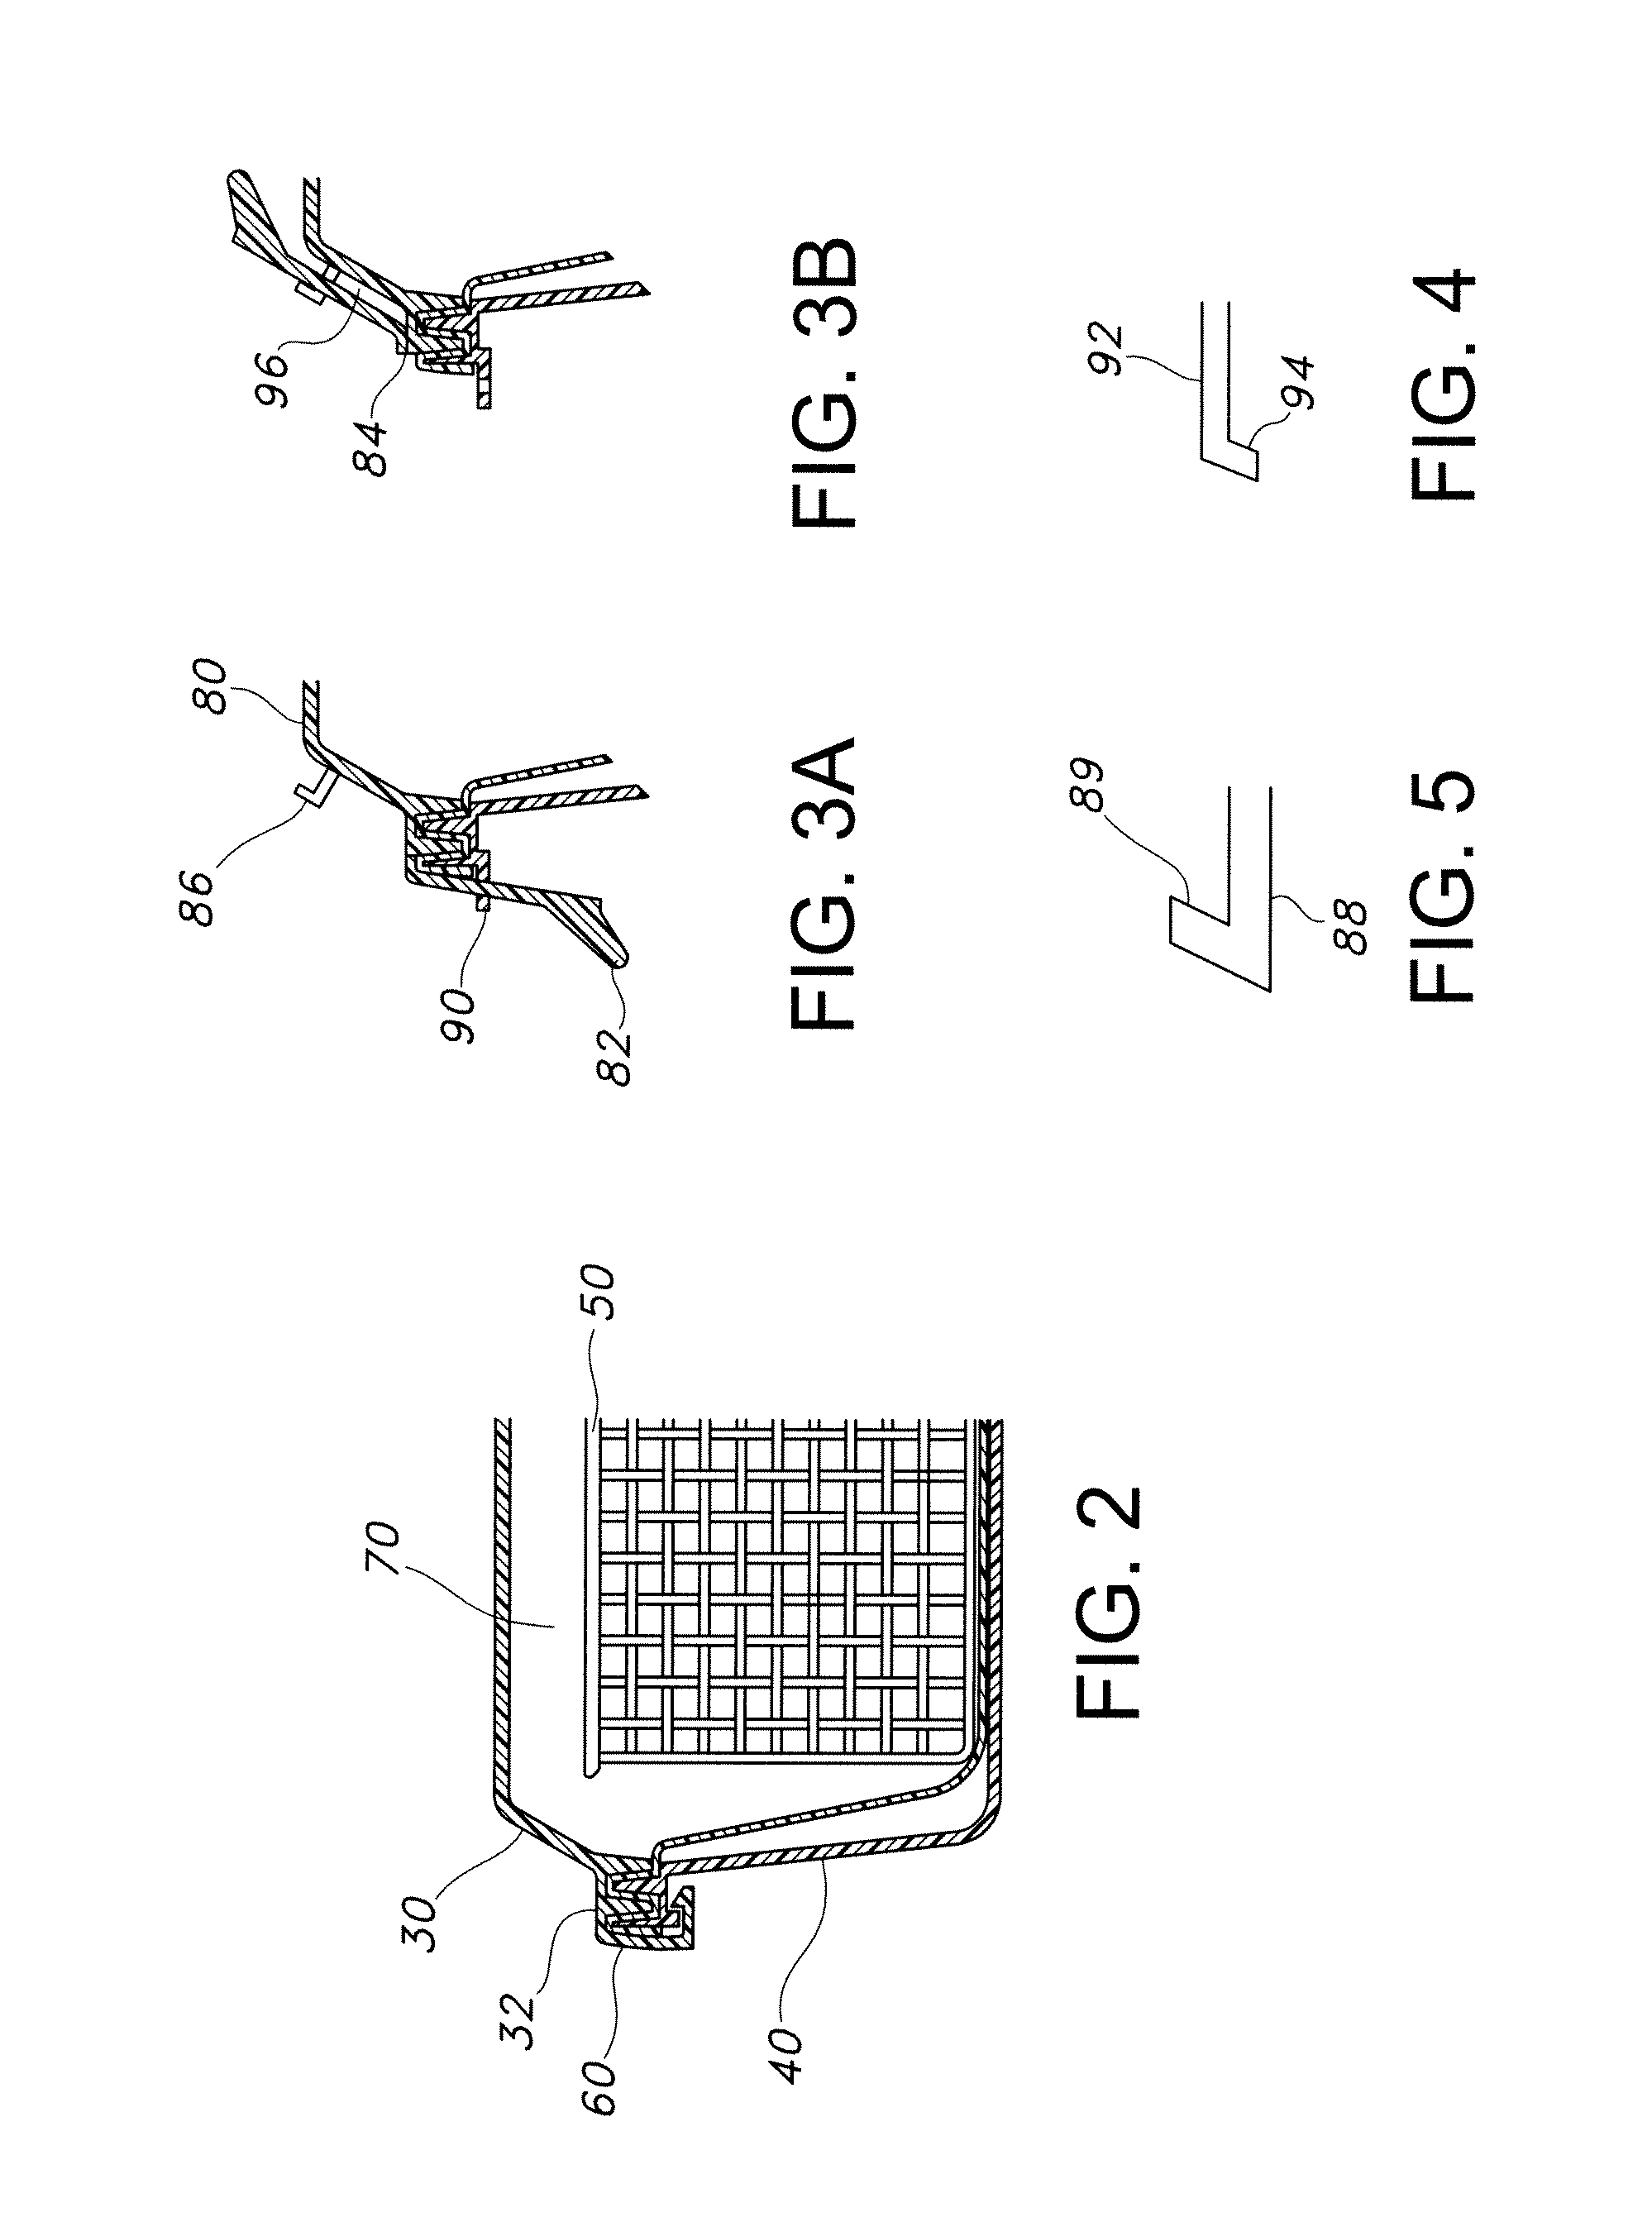 Sterilization Container With Releasable and Permanent Lock